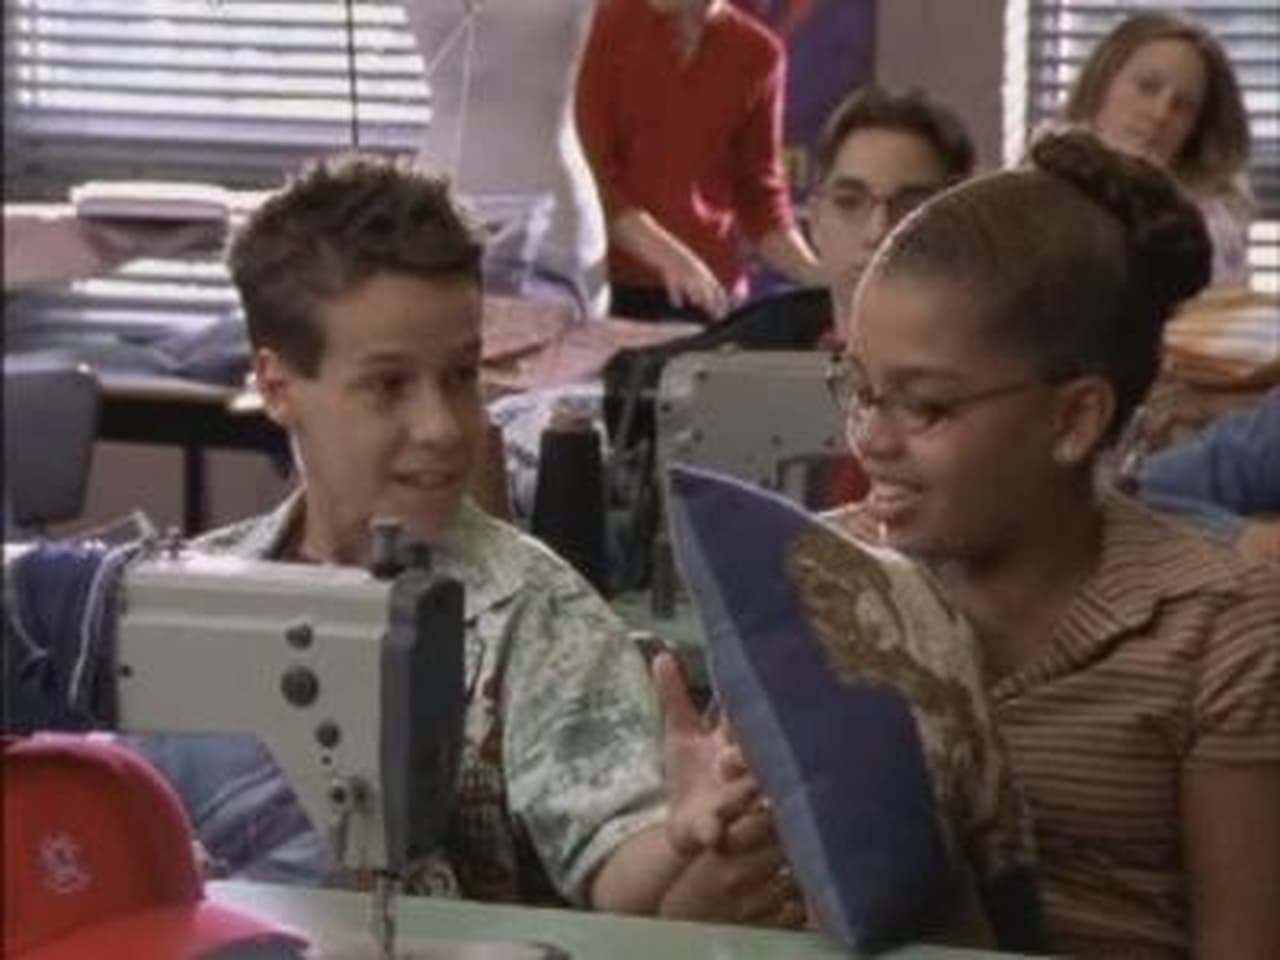 Degrassi - Season 2 Episode 11 : Don't Believe The Hype